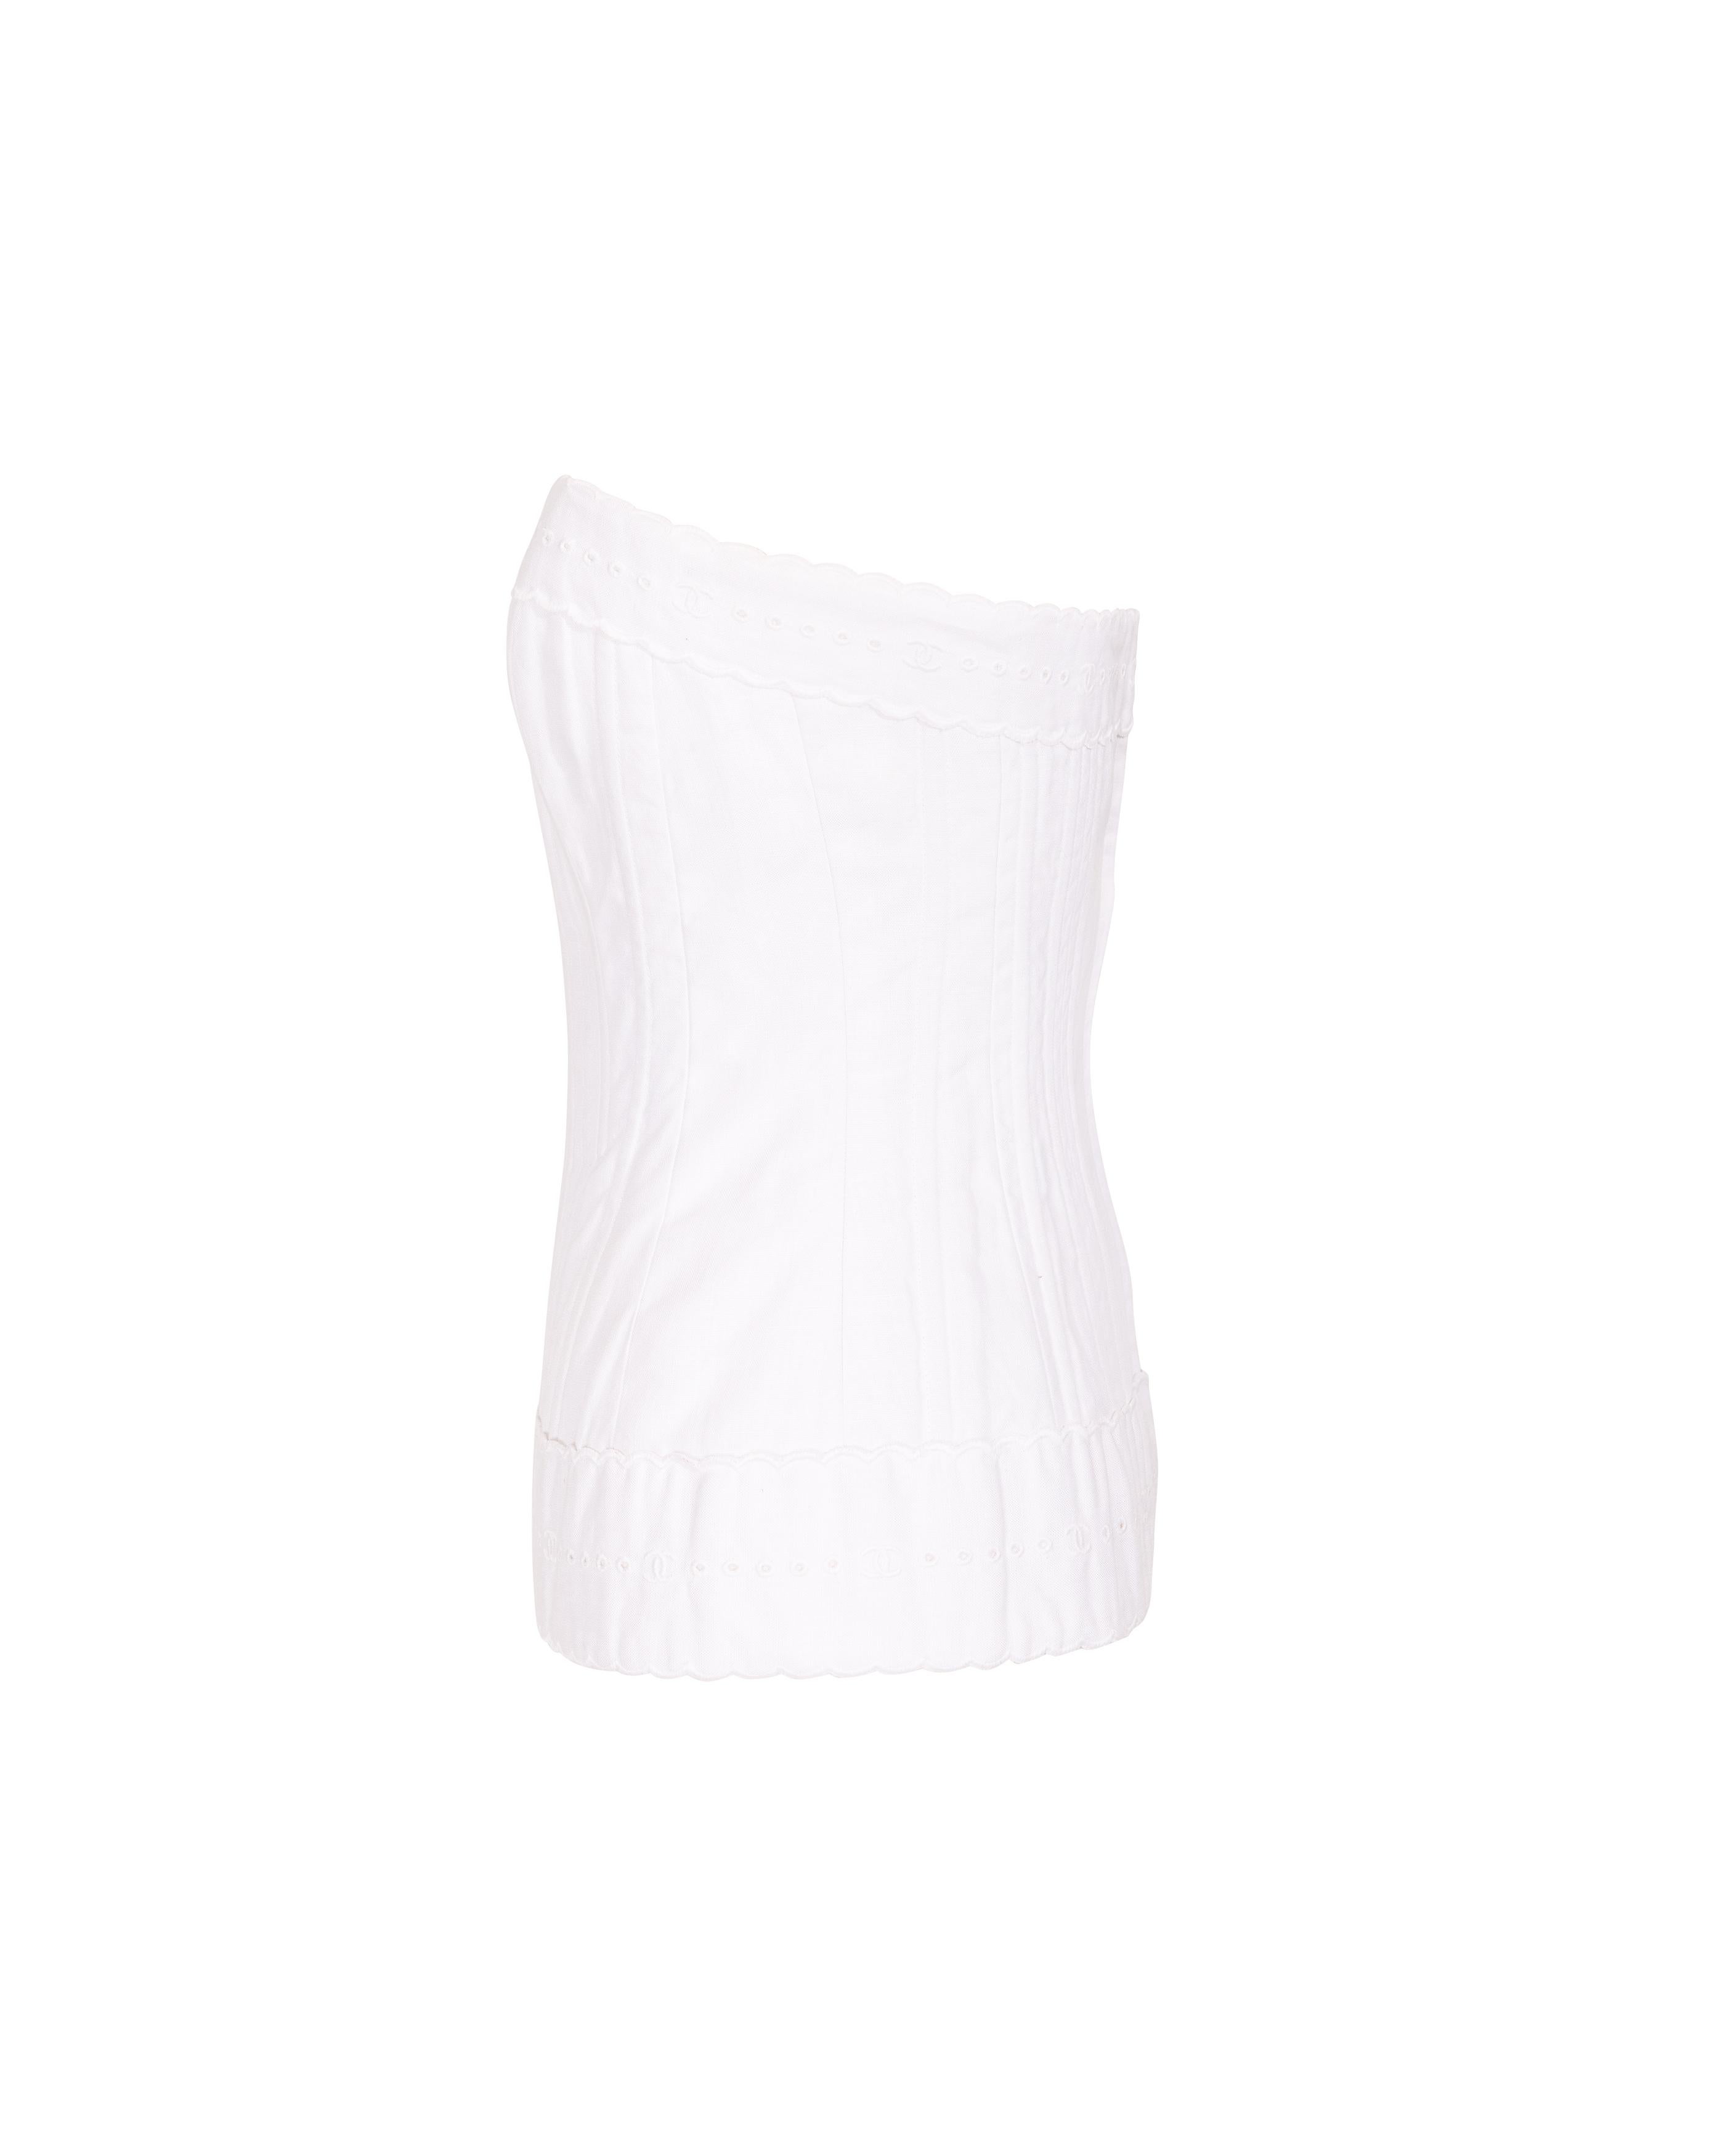 S/S 1993 Chanel by Karl Lagerfeld White Strapless Corset In Excellent Condition In North Hollywood, CA